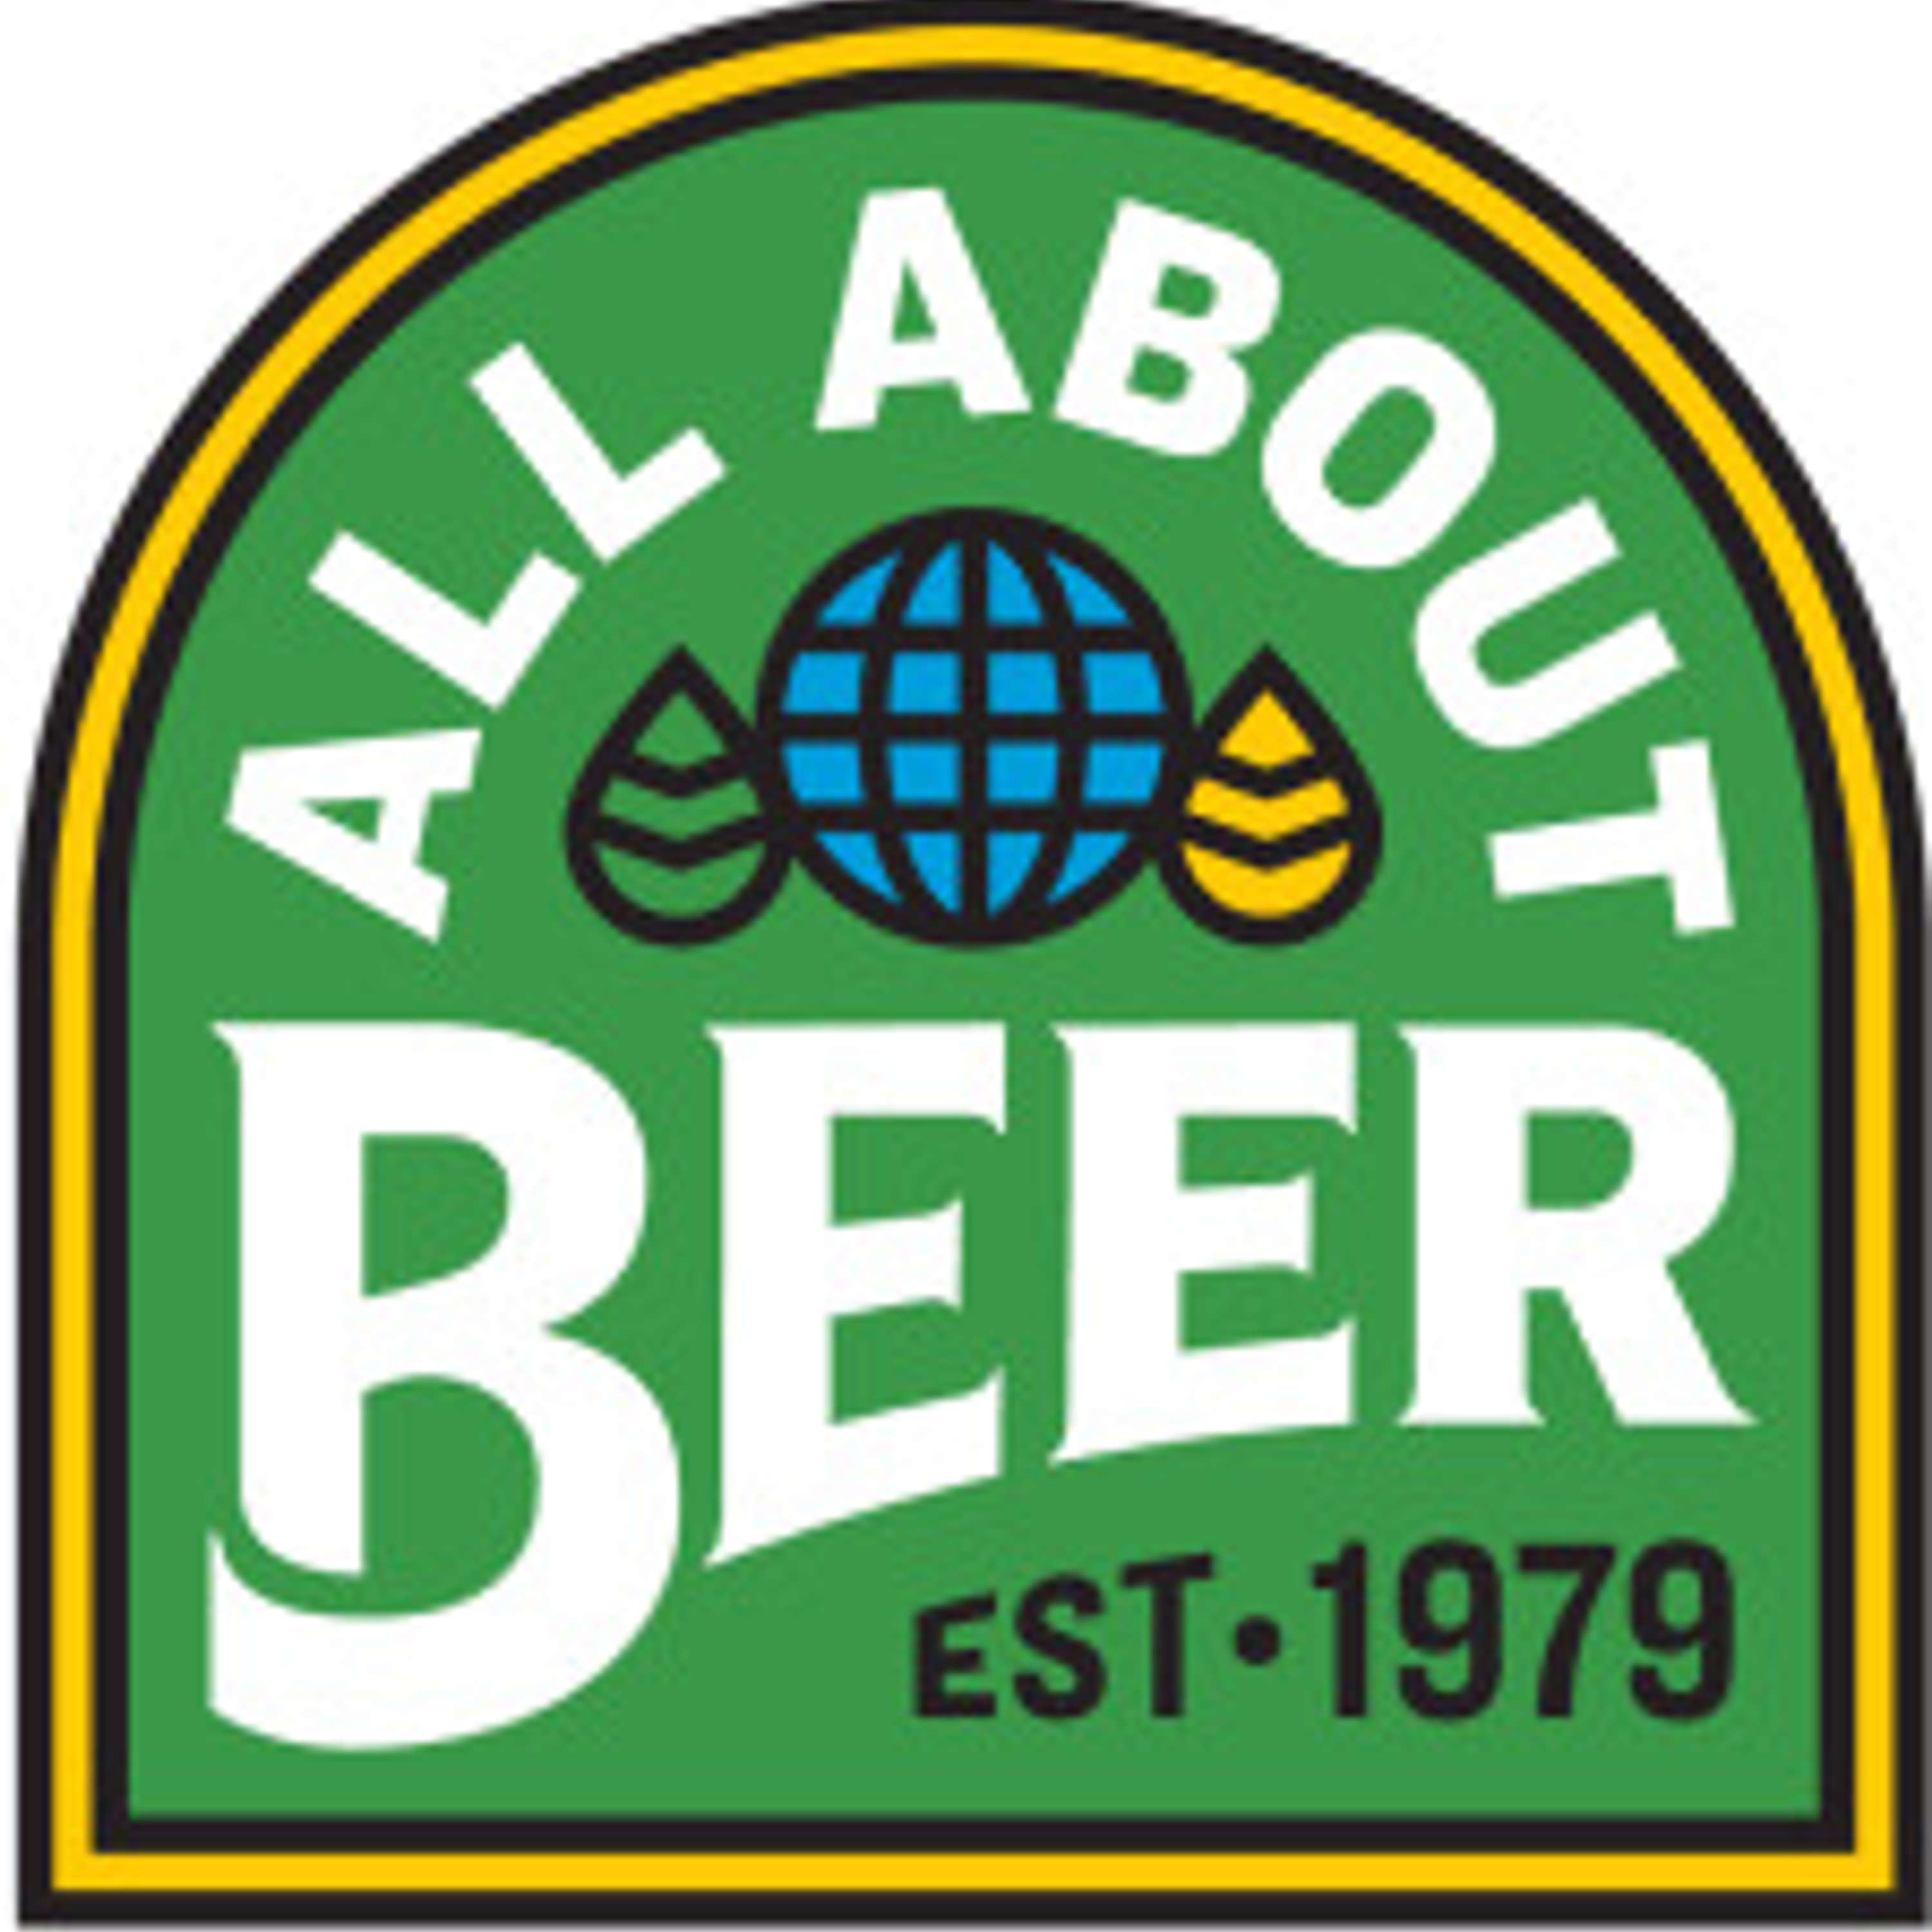 Welcome to the All About Beer Podcast Channel